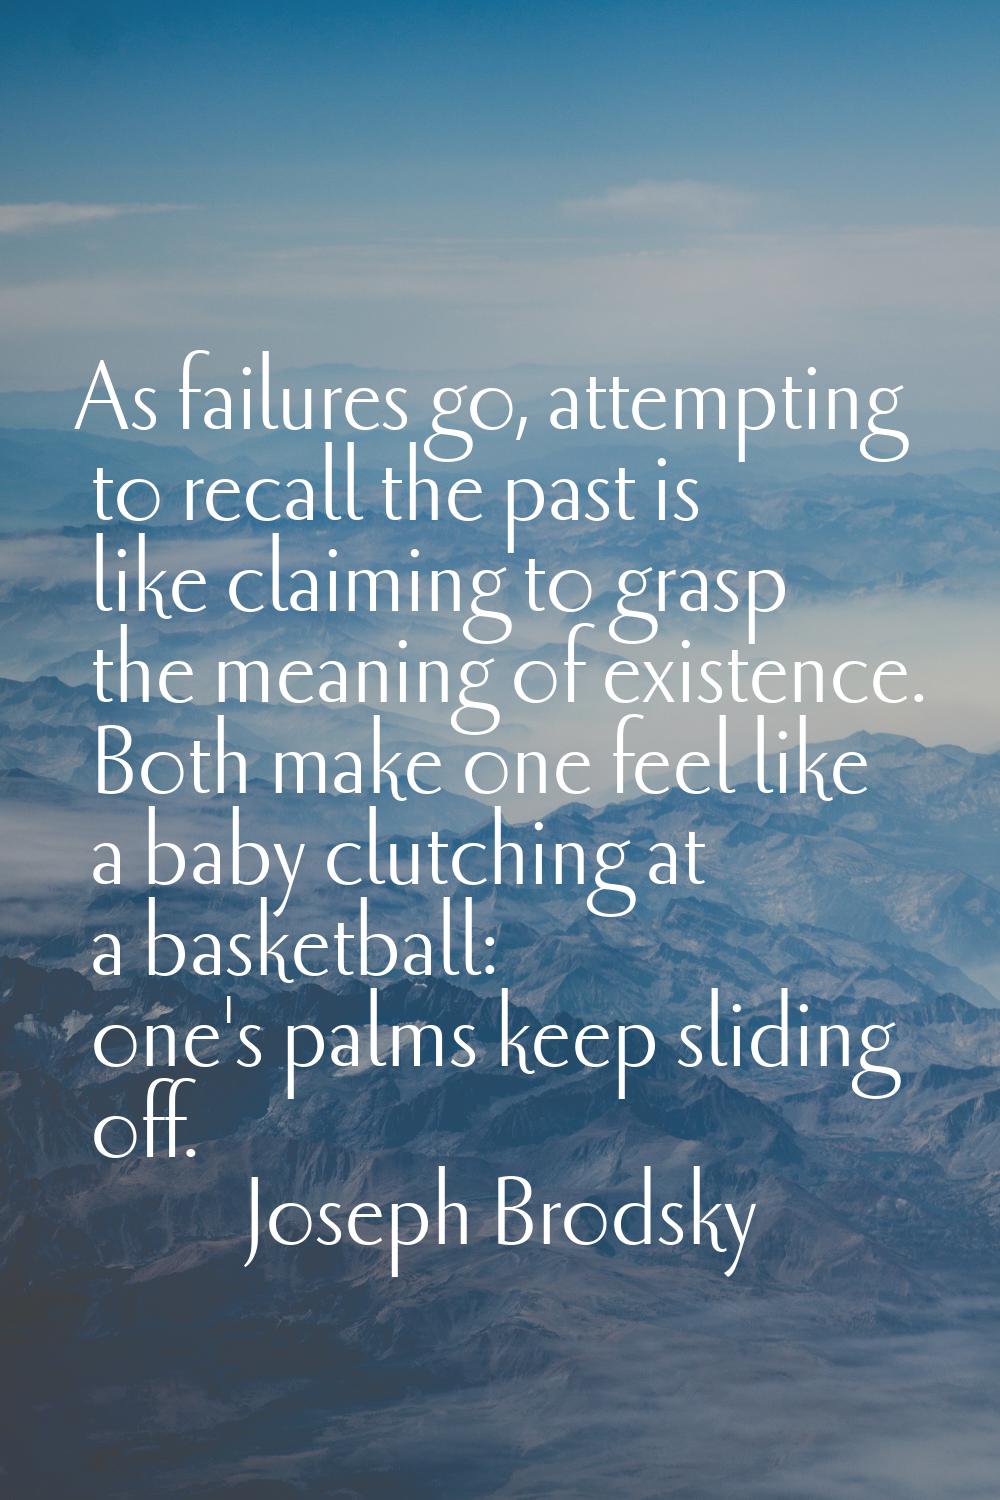 As failures go, attempting to recall the past is like claiming to grasp the meaning of existence. B